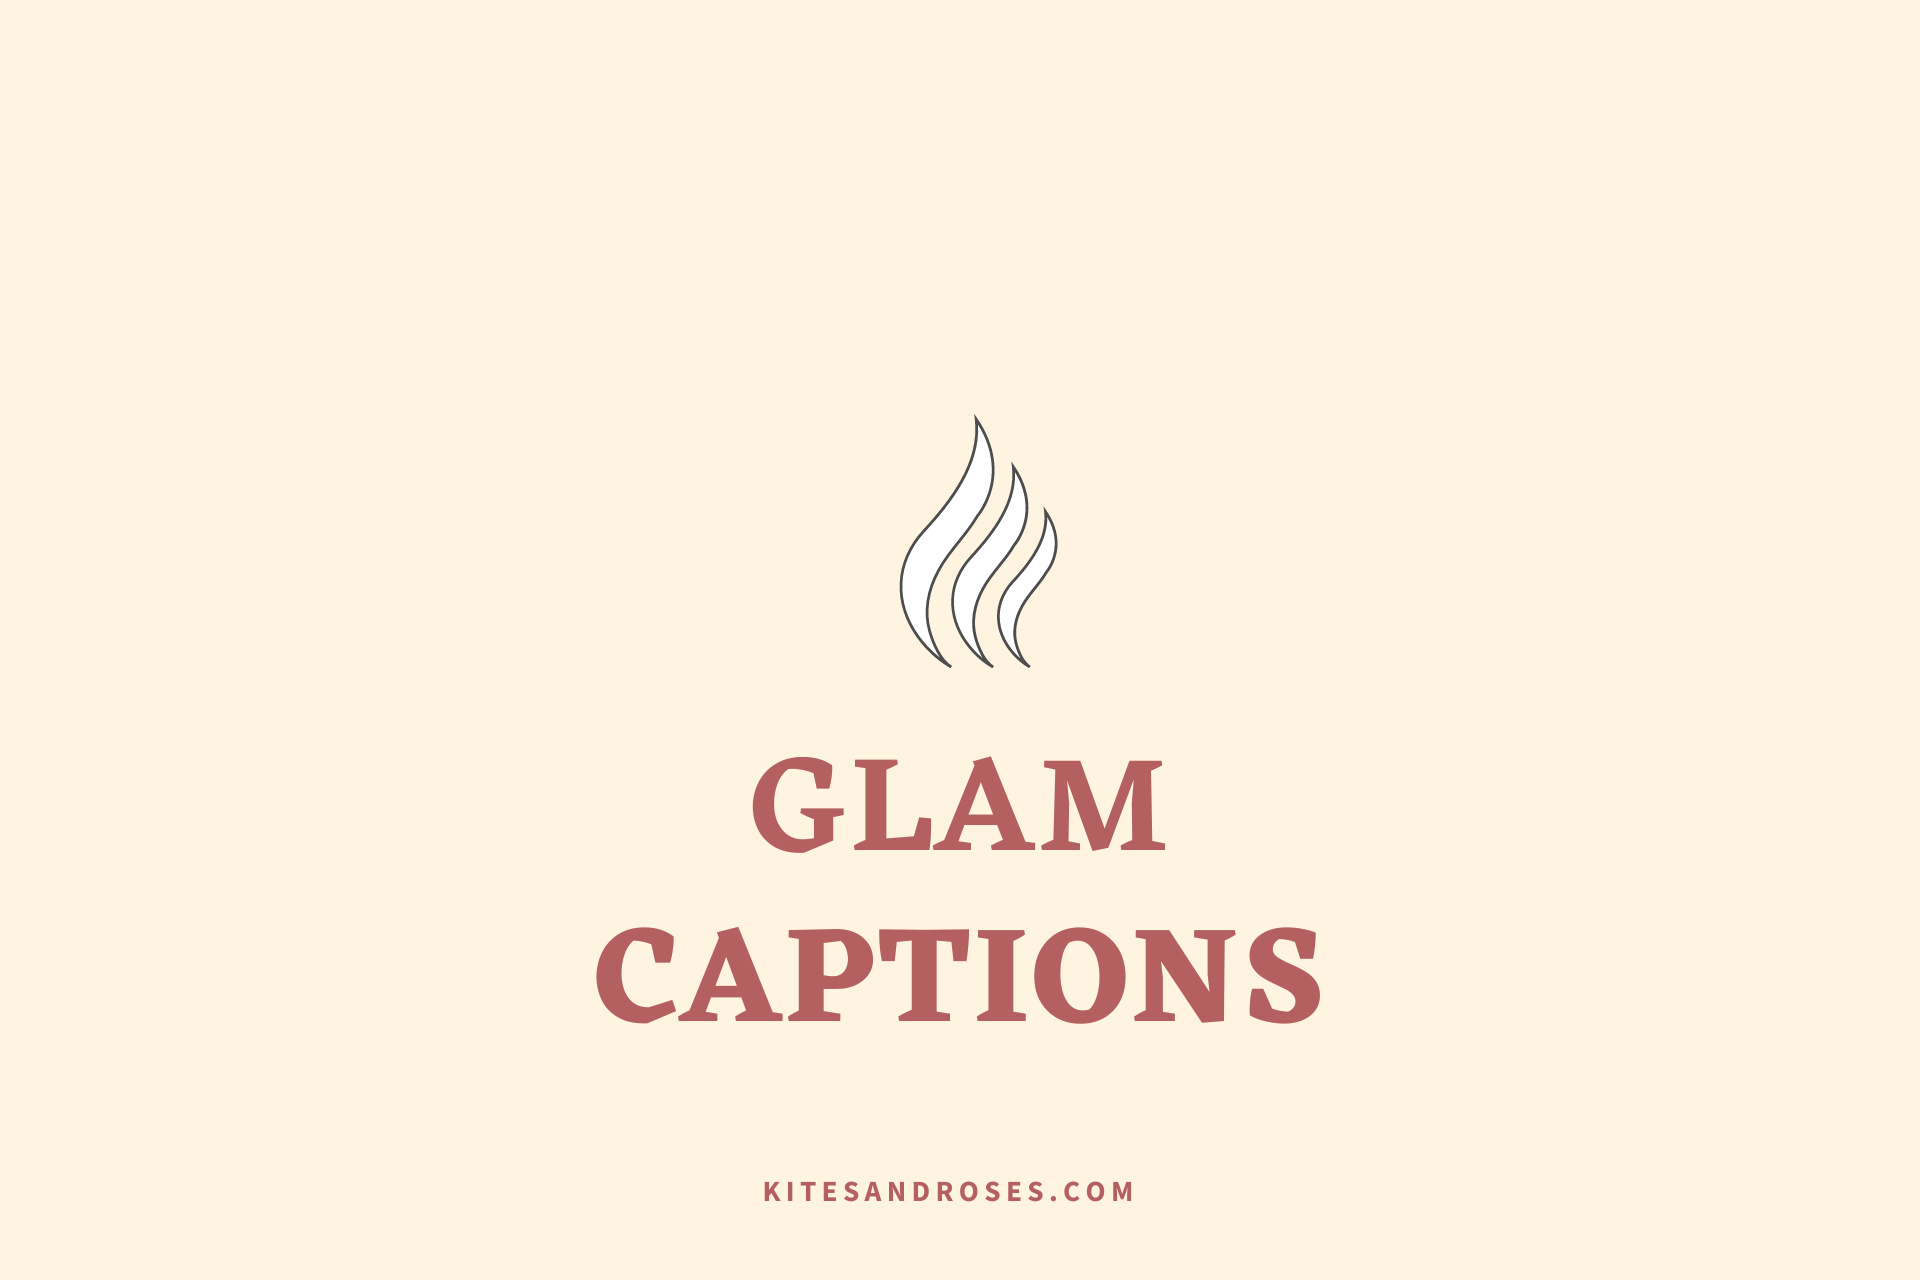 Glamour Captions - 27+ Glam Captions For Instagram [With Quotes] - Kites and Roses